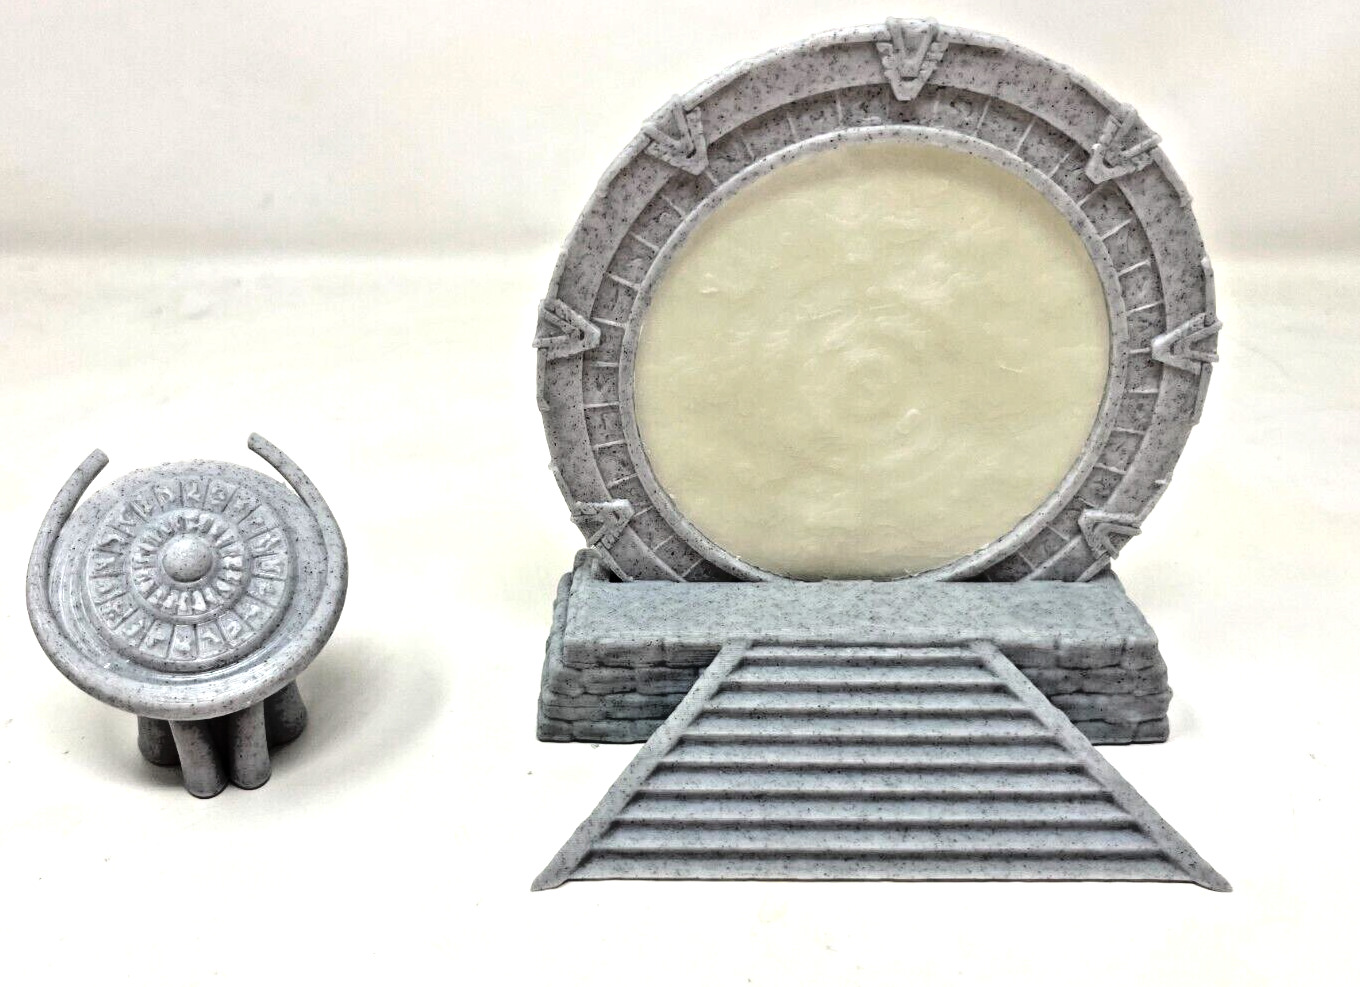 Stargate SG1 Portal Glow in the Dark Event Horizon & Dial Home Device-3D Printed